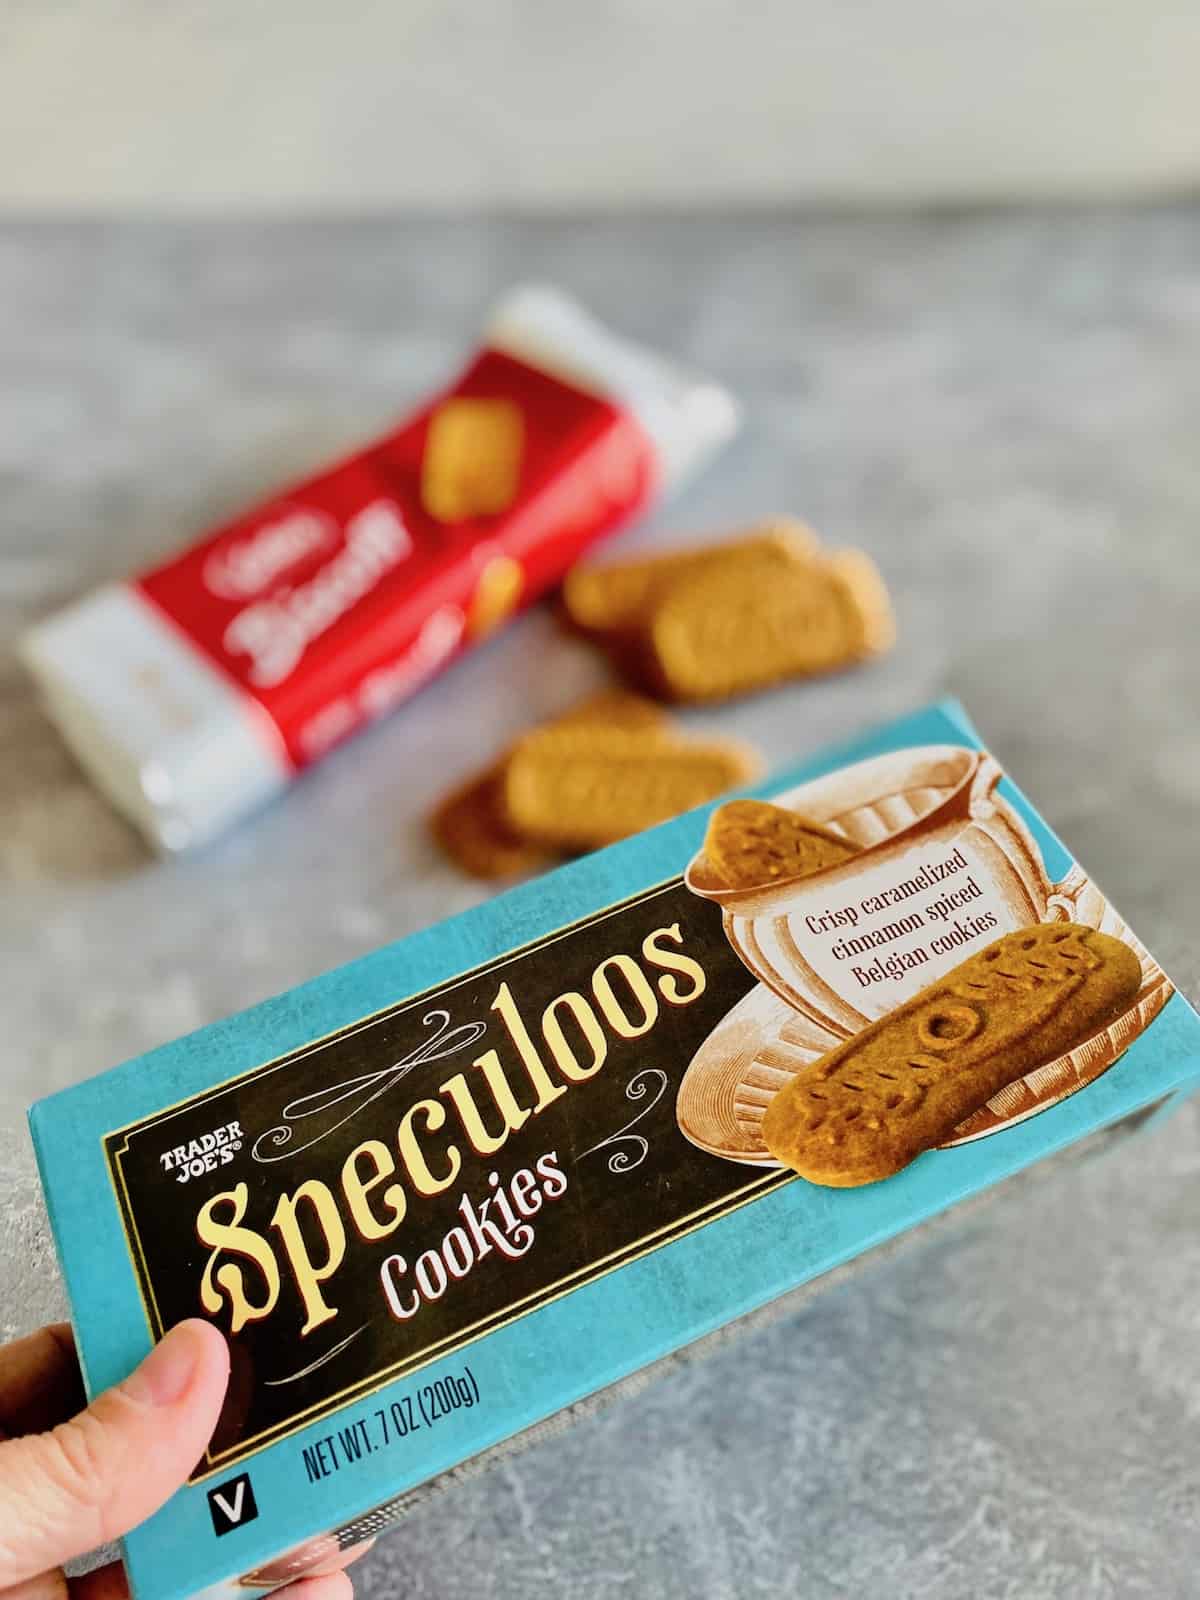 Speculoos cookies from Trader Joes in the box